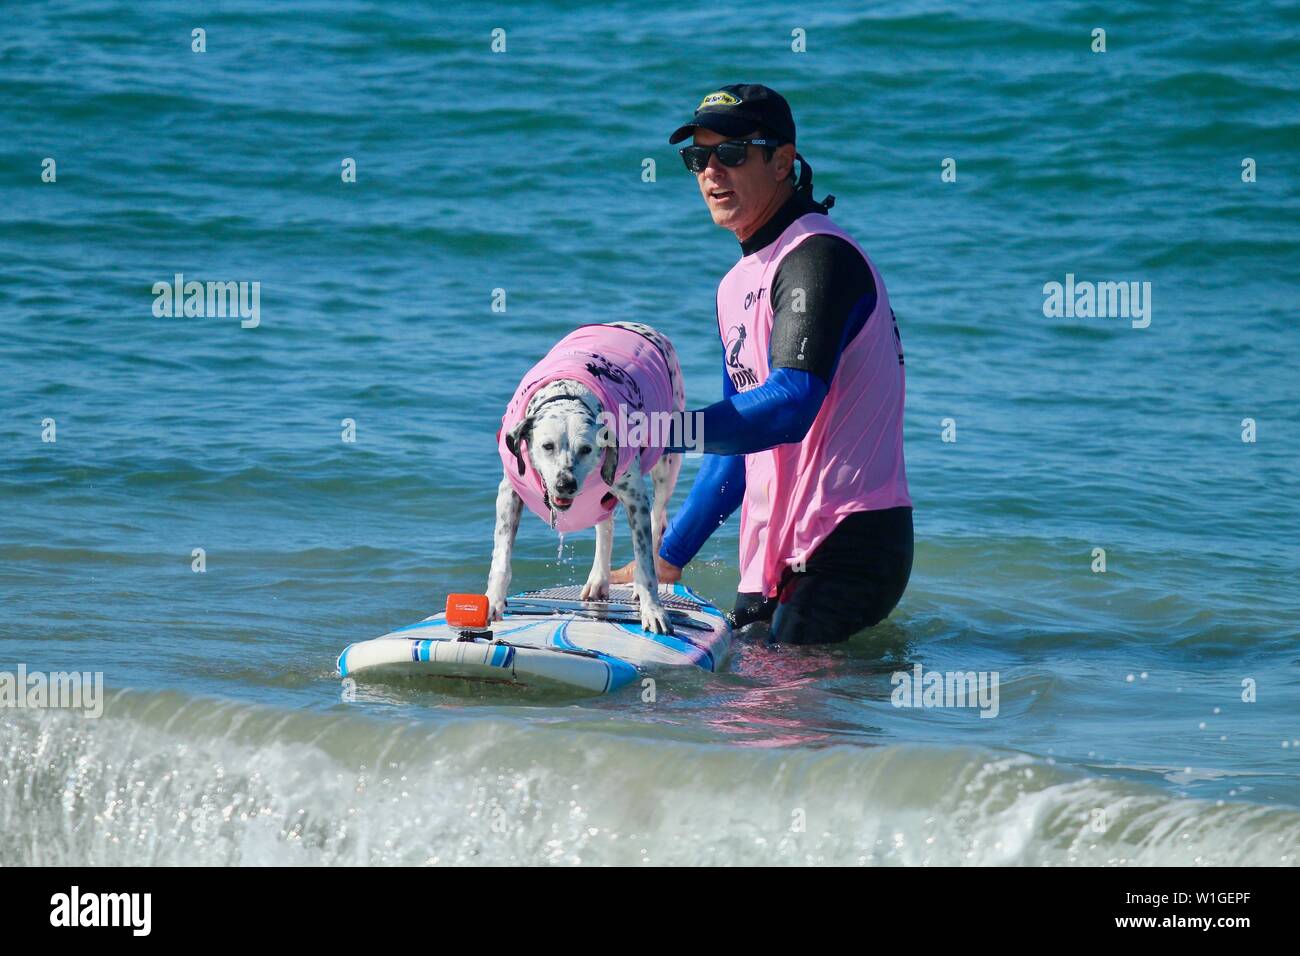 Dalmatian Dog surfing in a dog surfing competition in Huntington Beach, California Stock Photo